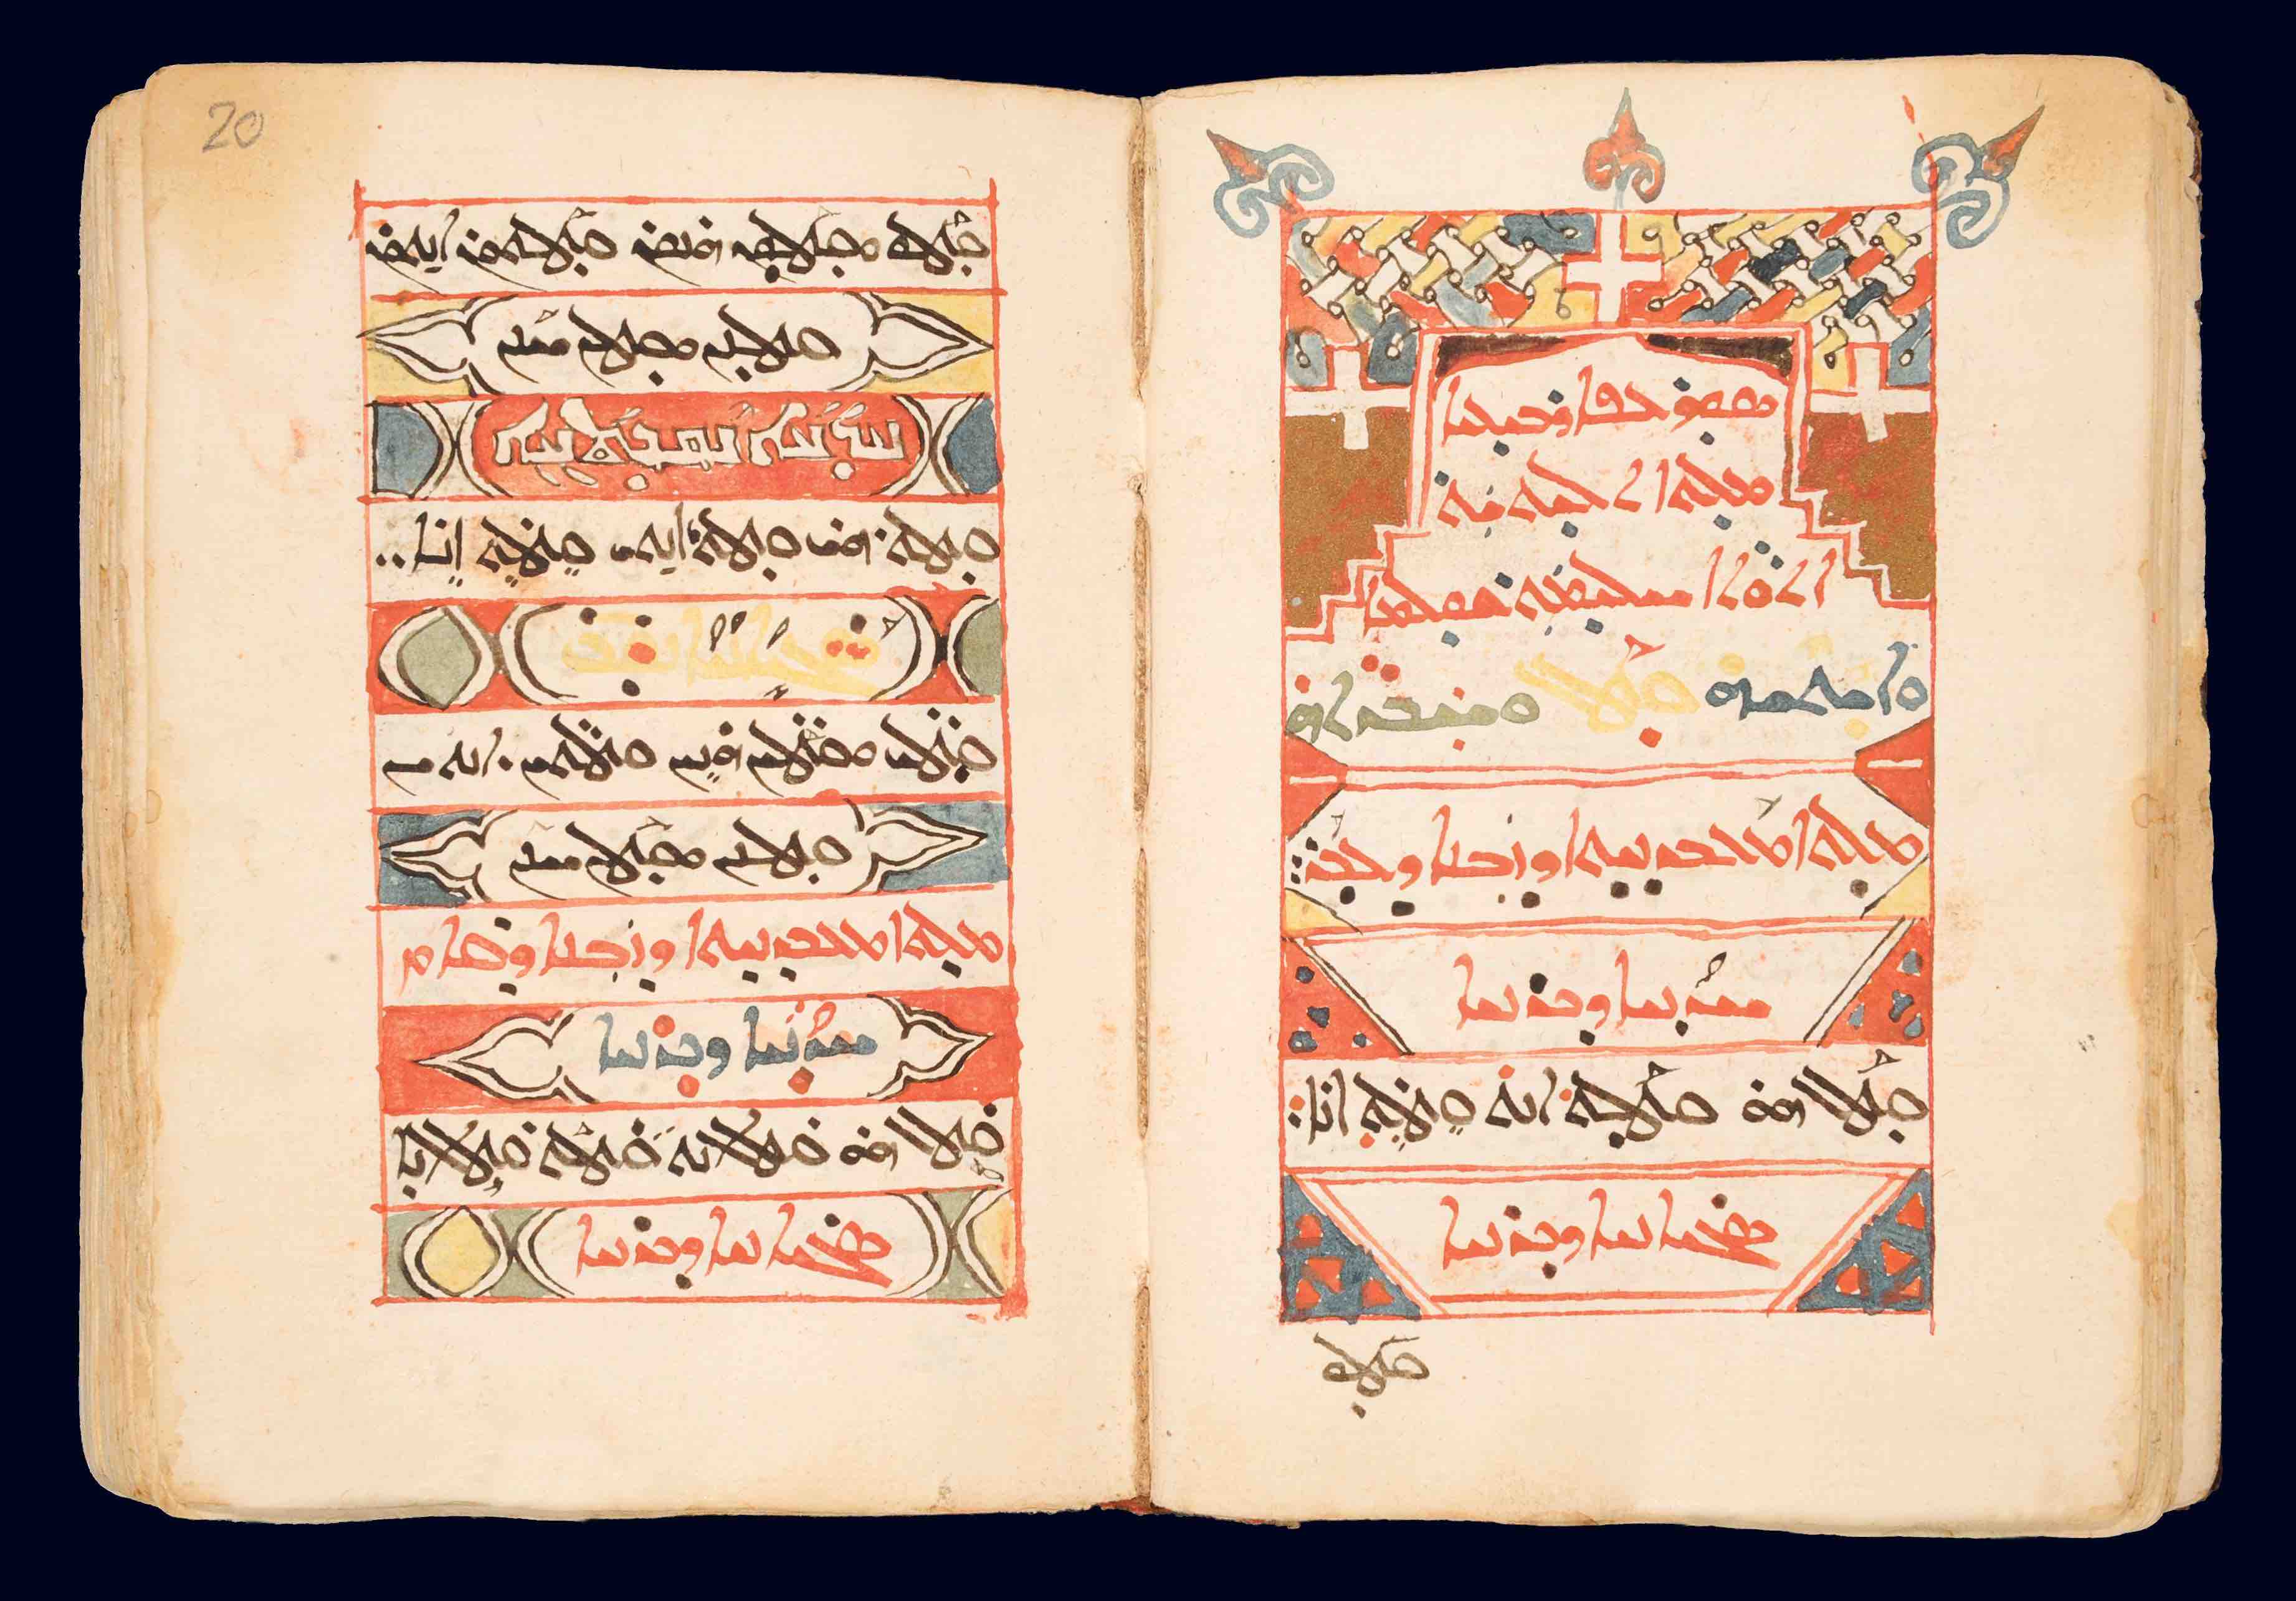 17th/18th-c. Syriac grammar book, Syrian Orthodox Archdiocese of Mosul destroyed after the fall of Mosul in 2014 (<a href='https://w3id.org/vhmml/readingRoom/view/136346'>ASOM 107</a>)